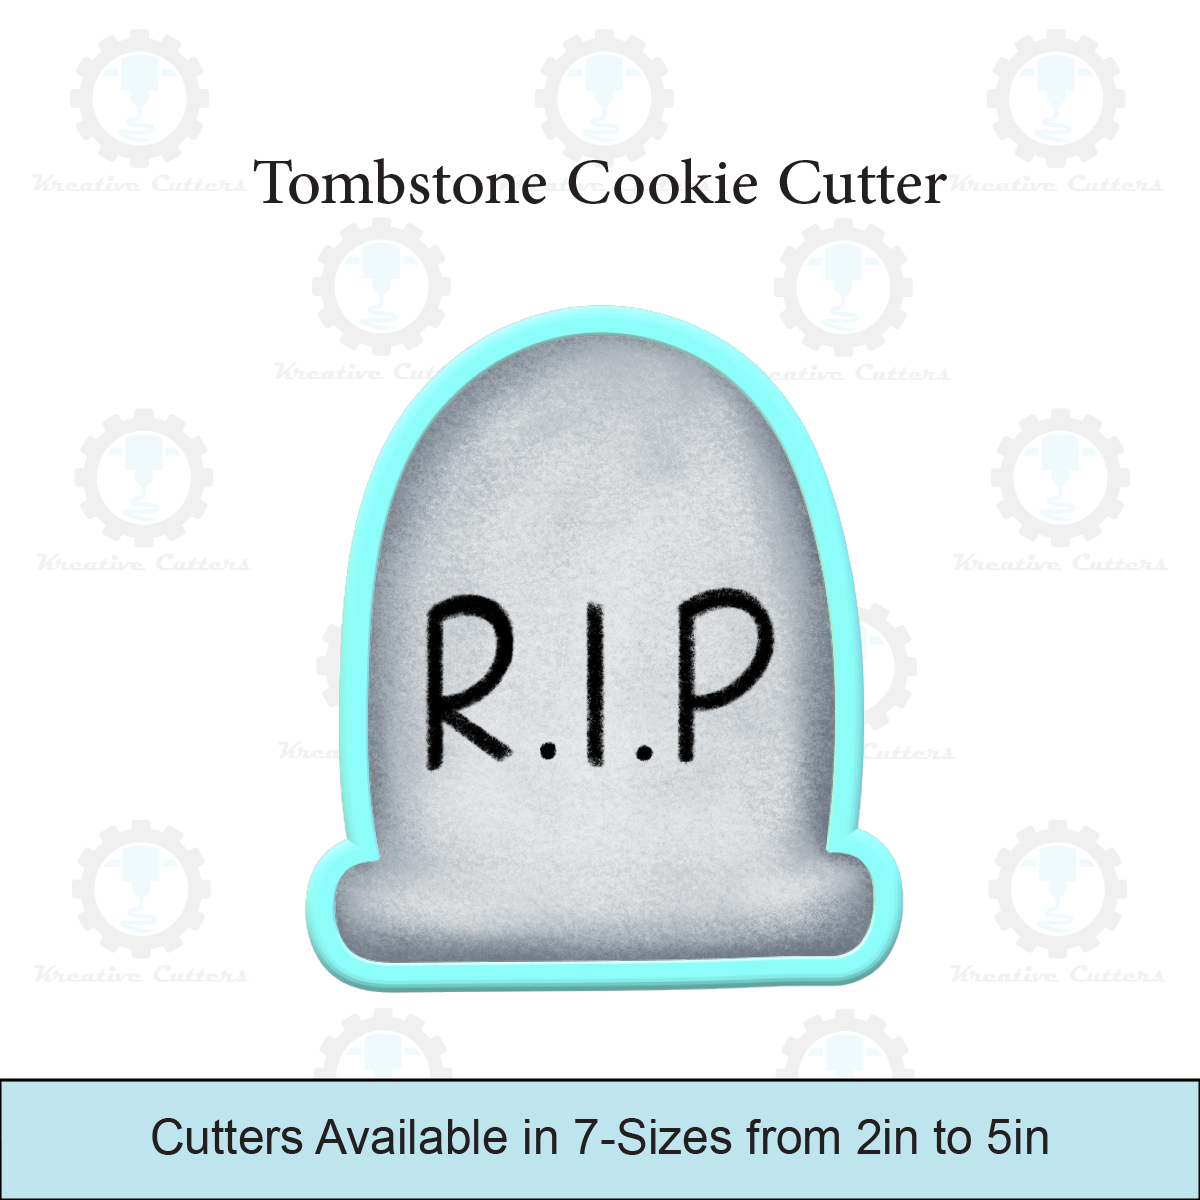 Tombstone Cookie Cutters